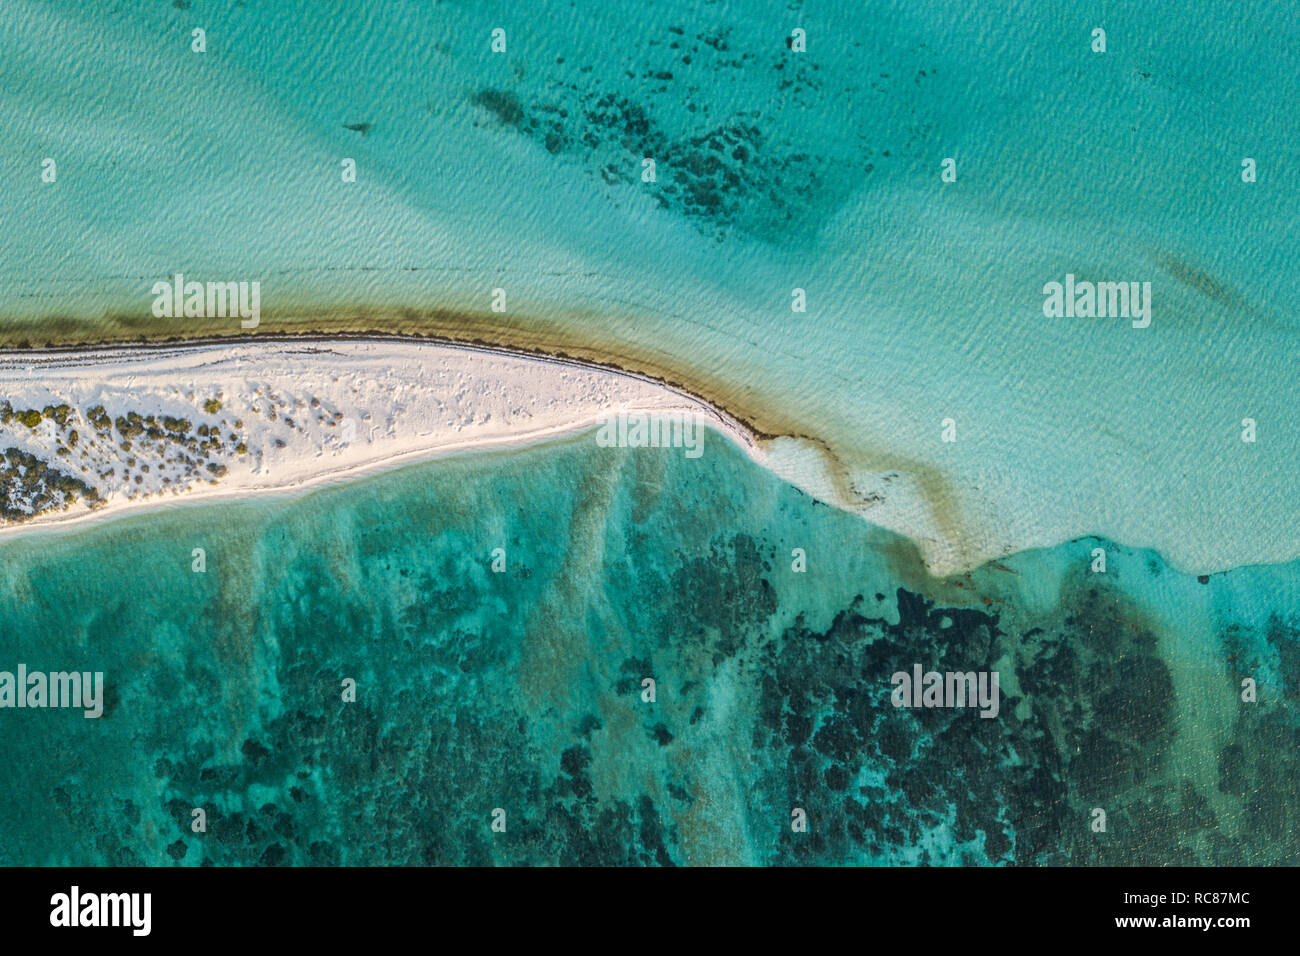 Reef life and cay, Alacranes, Campeche, Mexico Stock Photo